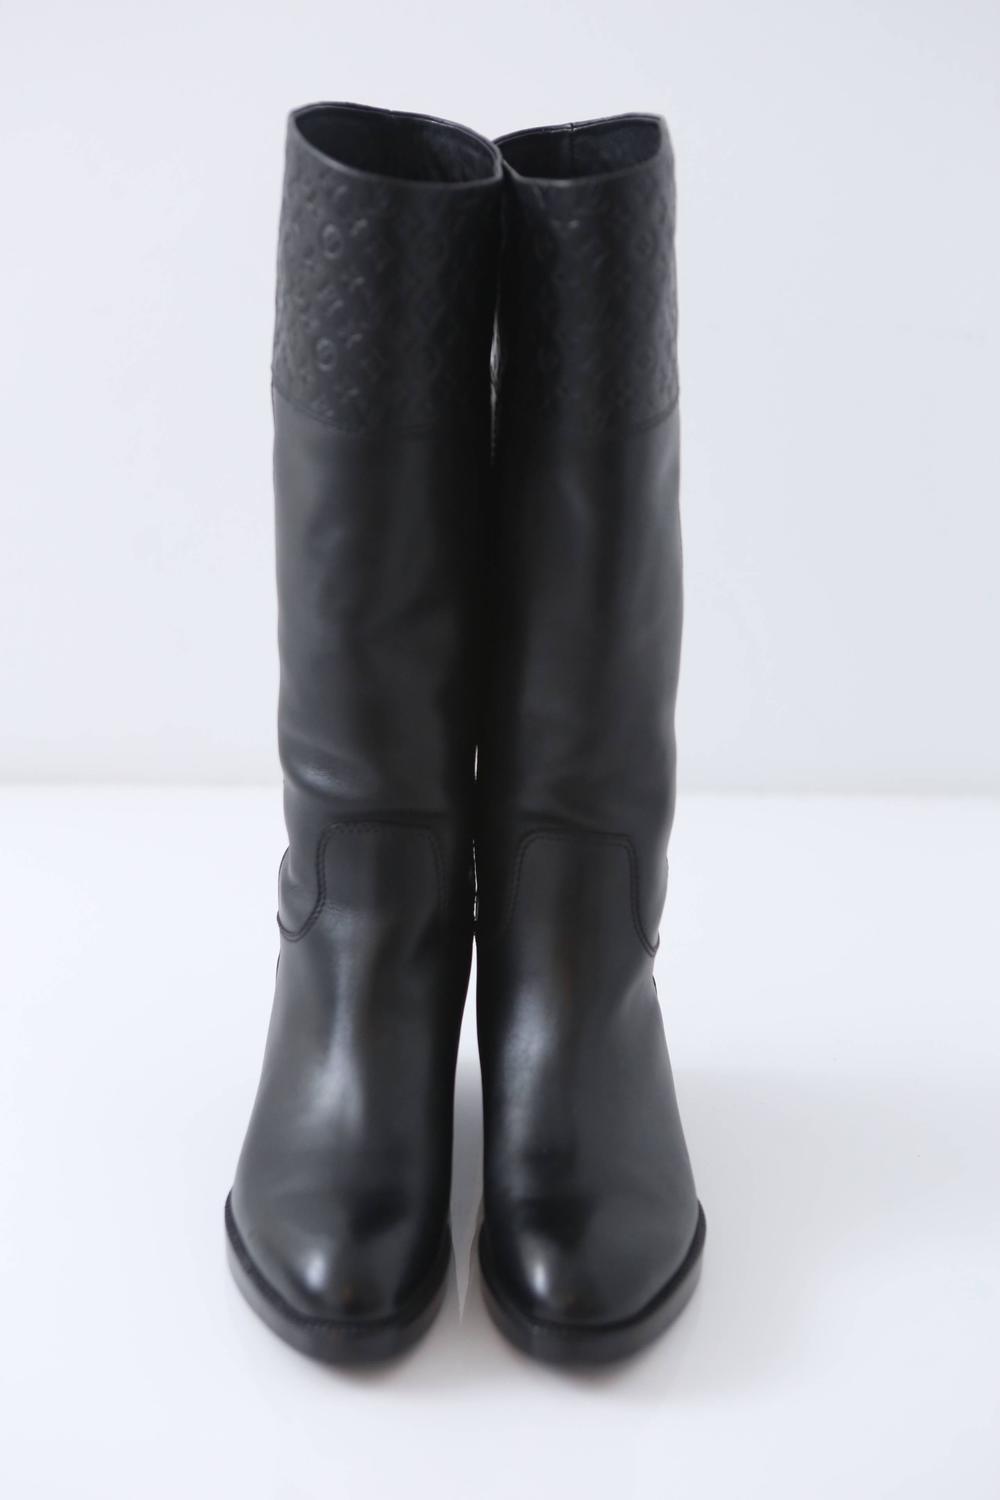 Louis Vuitton Black Leather Riding Boots W/ Embossed Monogram For Sale at 1stdibs